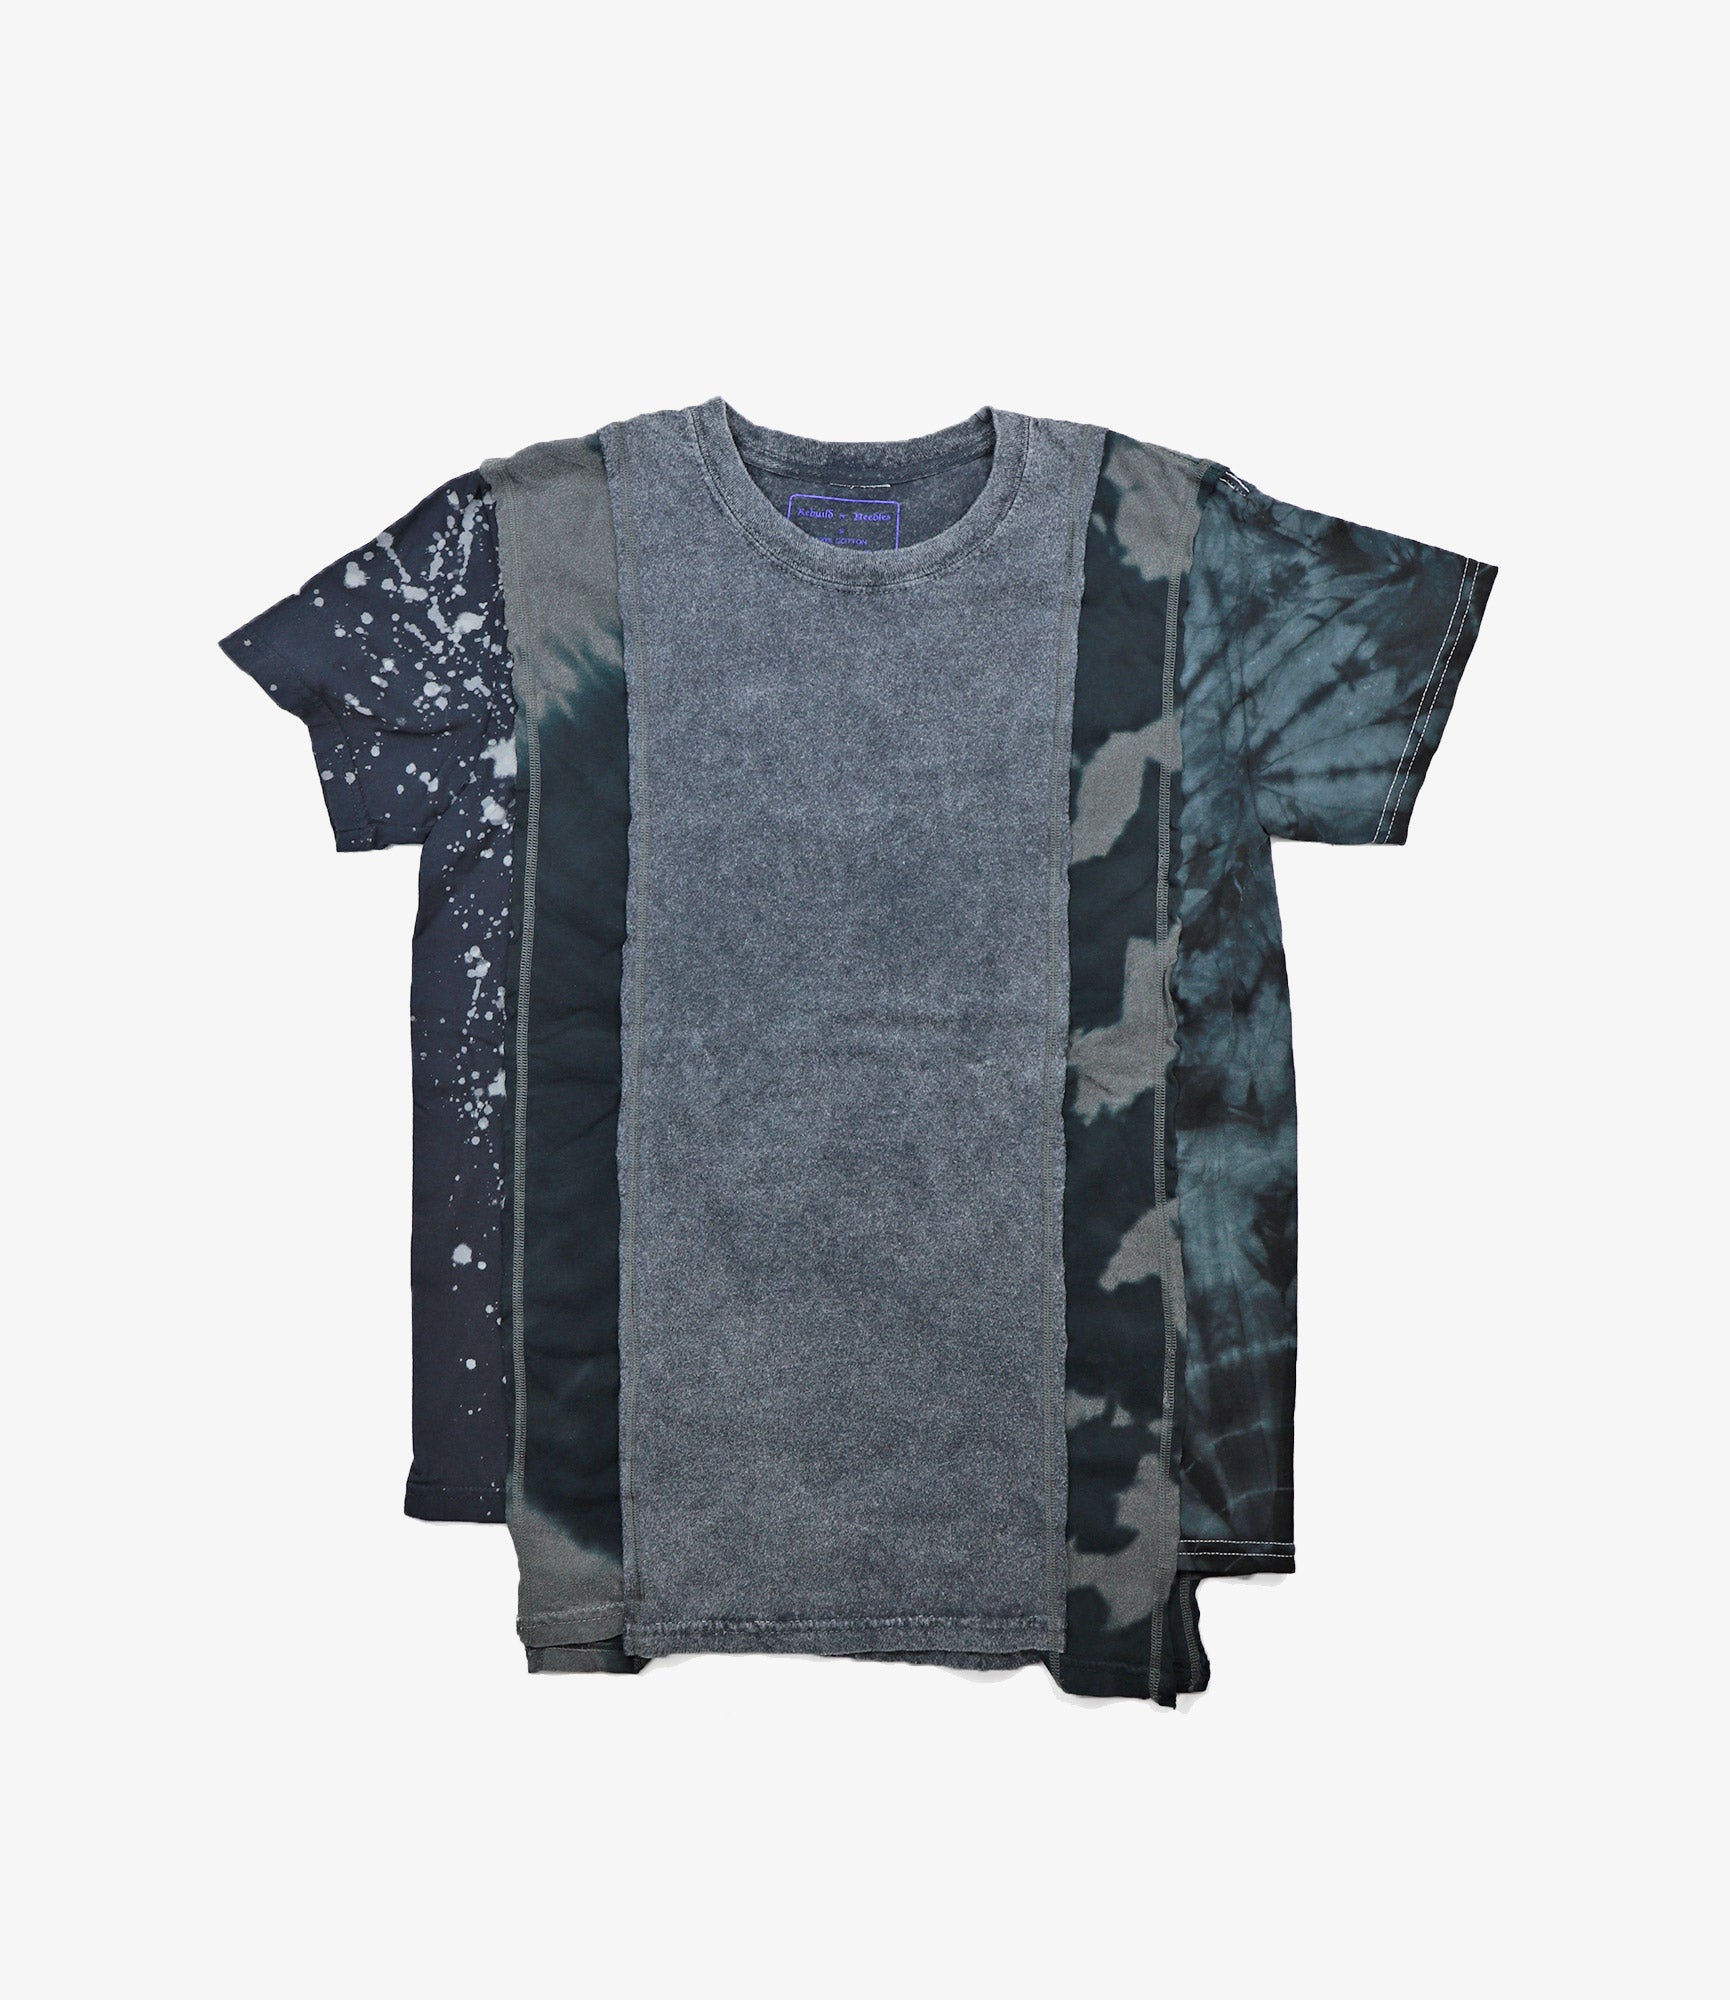 Rebuild by Needles 5 Cuts S/S Tee -B&W Mishmash Assorted – Rebuild by Needles – Nepenthes London